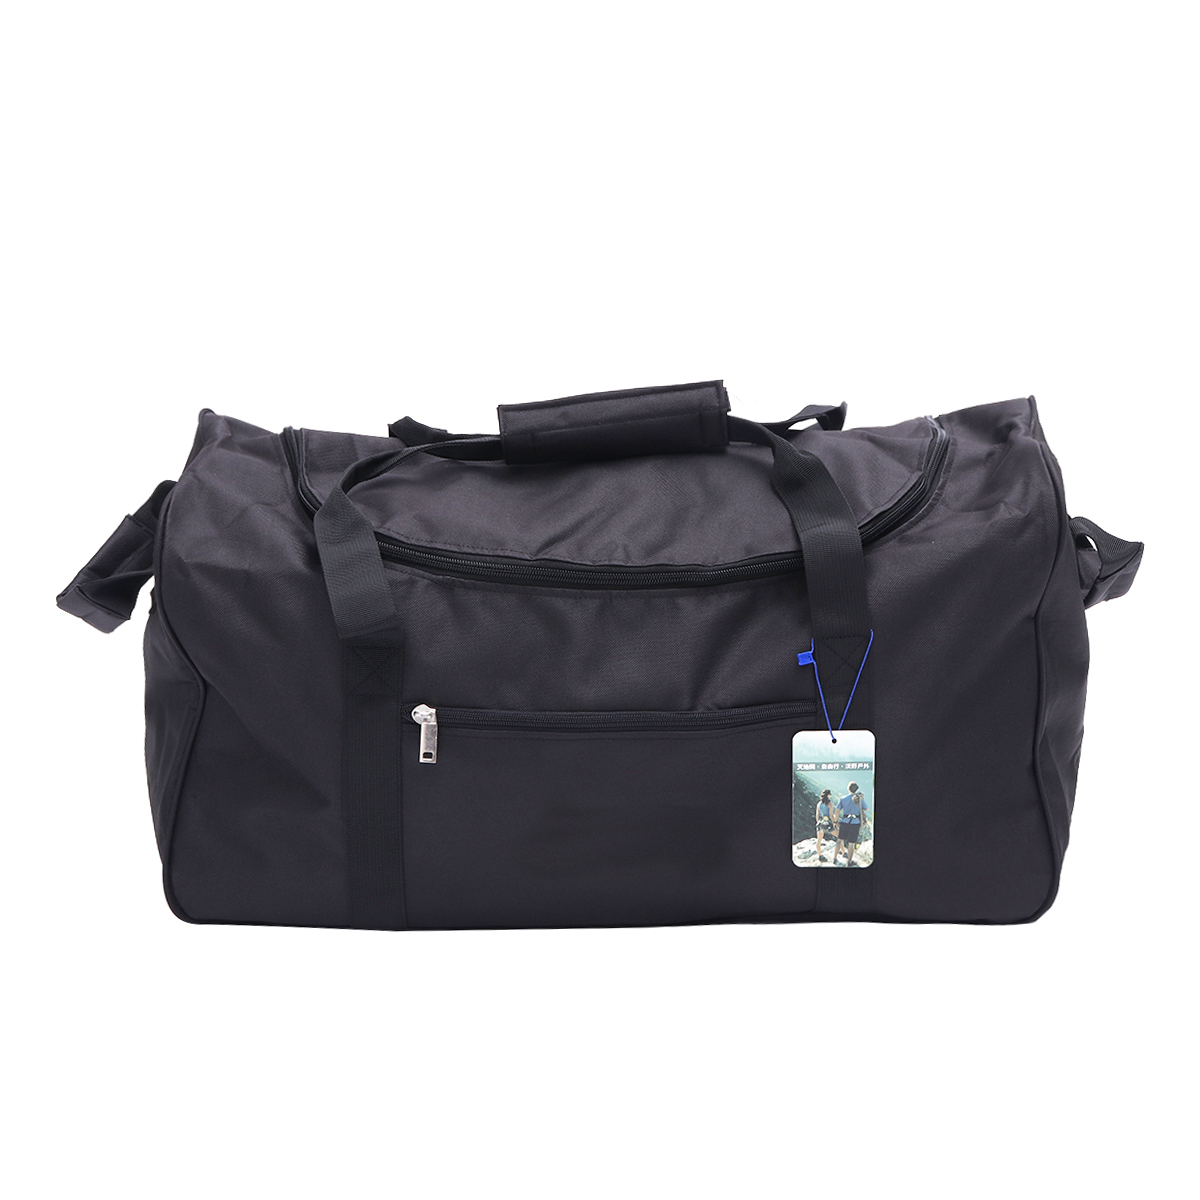 Waterproof-Black-Oxford-Cloth-Large-Capacity-Bag-Foldable-Backpack-Outdoor-Sports-Travel-Hiking-Fitn-1451556-4